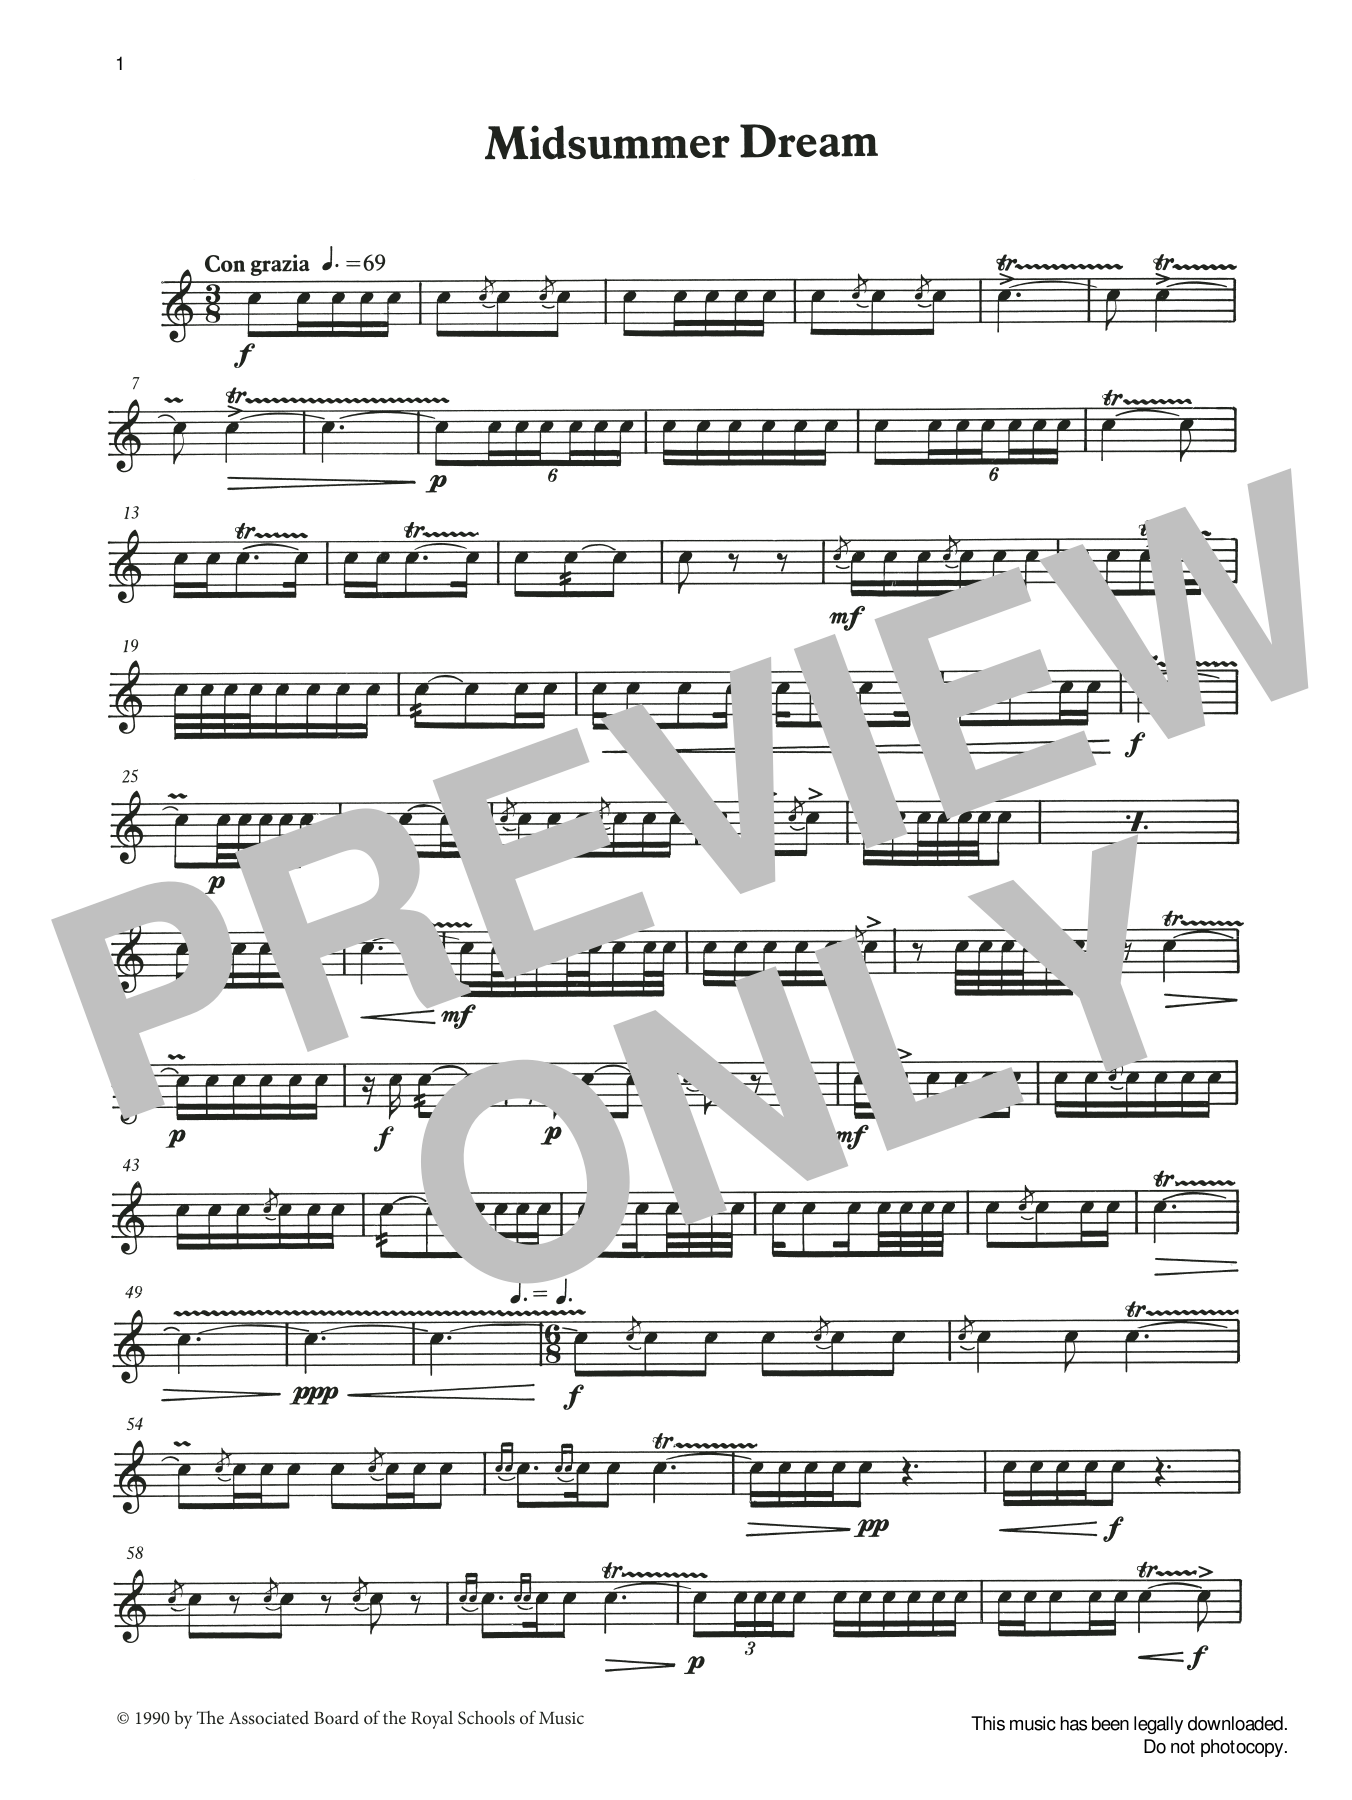 Download Ian Wright and Kevin Hathaway Midsummer Dream from Graded Music for S Sheet Music